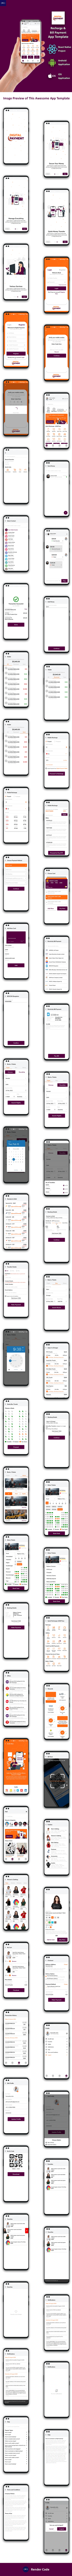 Online Recharge Ticket Booking & Bill Payment App Template in React Native - 6